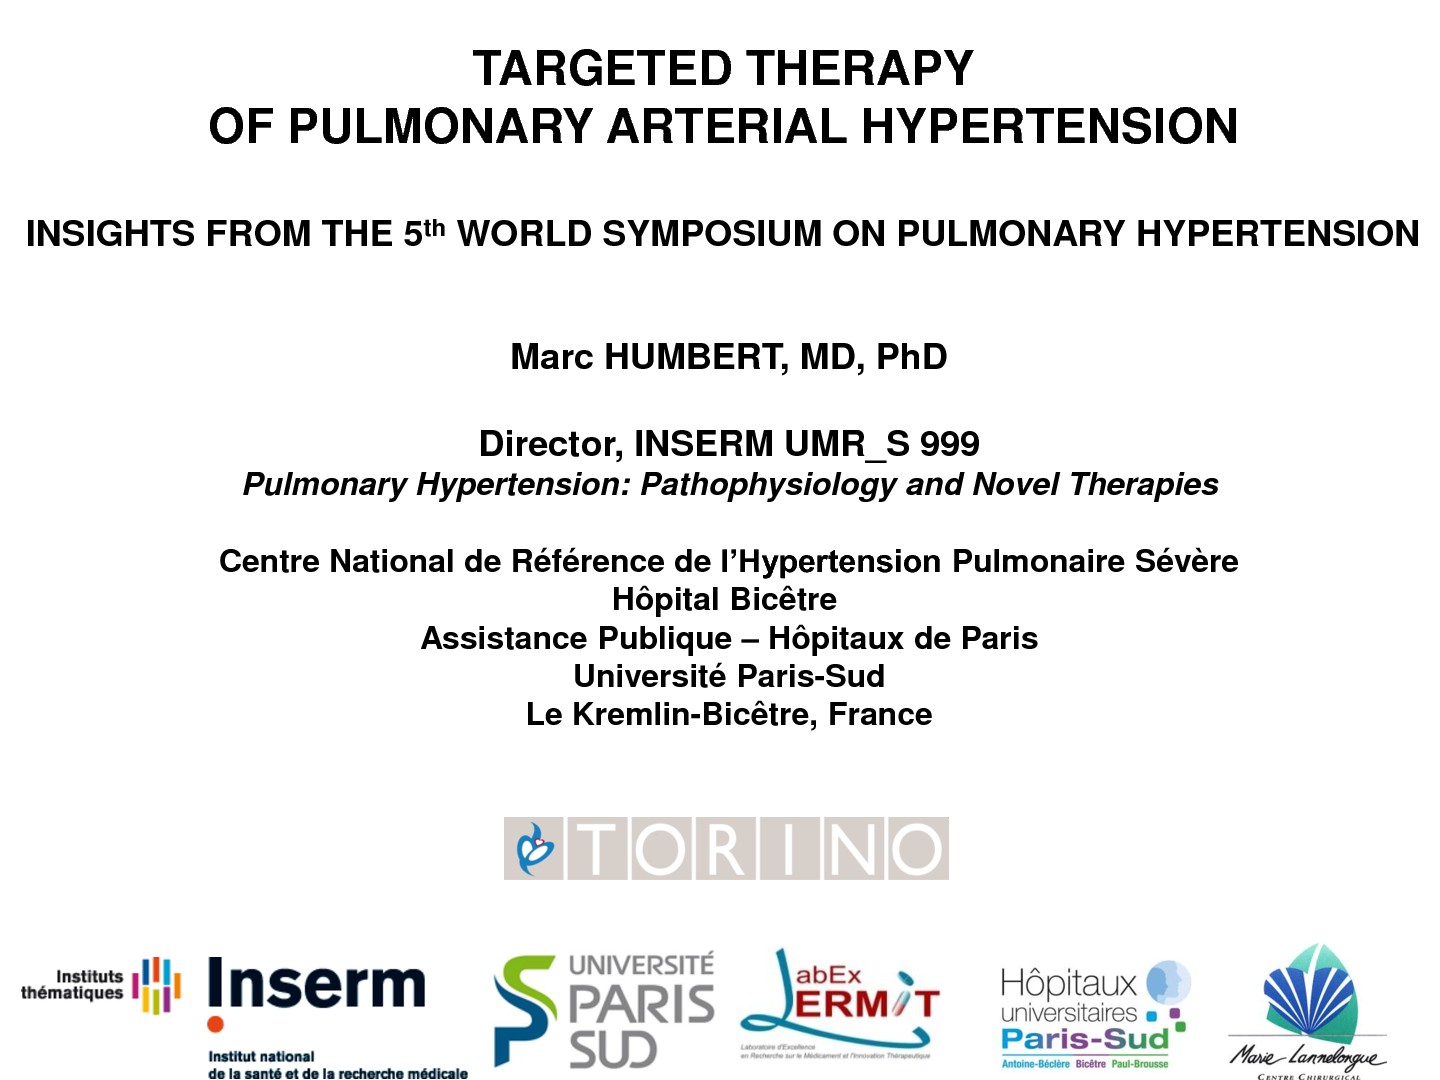 Targeted therapy of pulmonary arterial hypertension. Marc HUMBERT